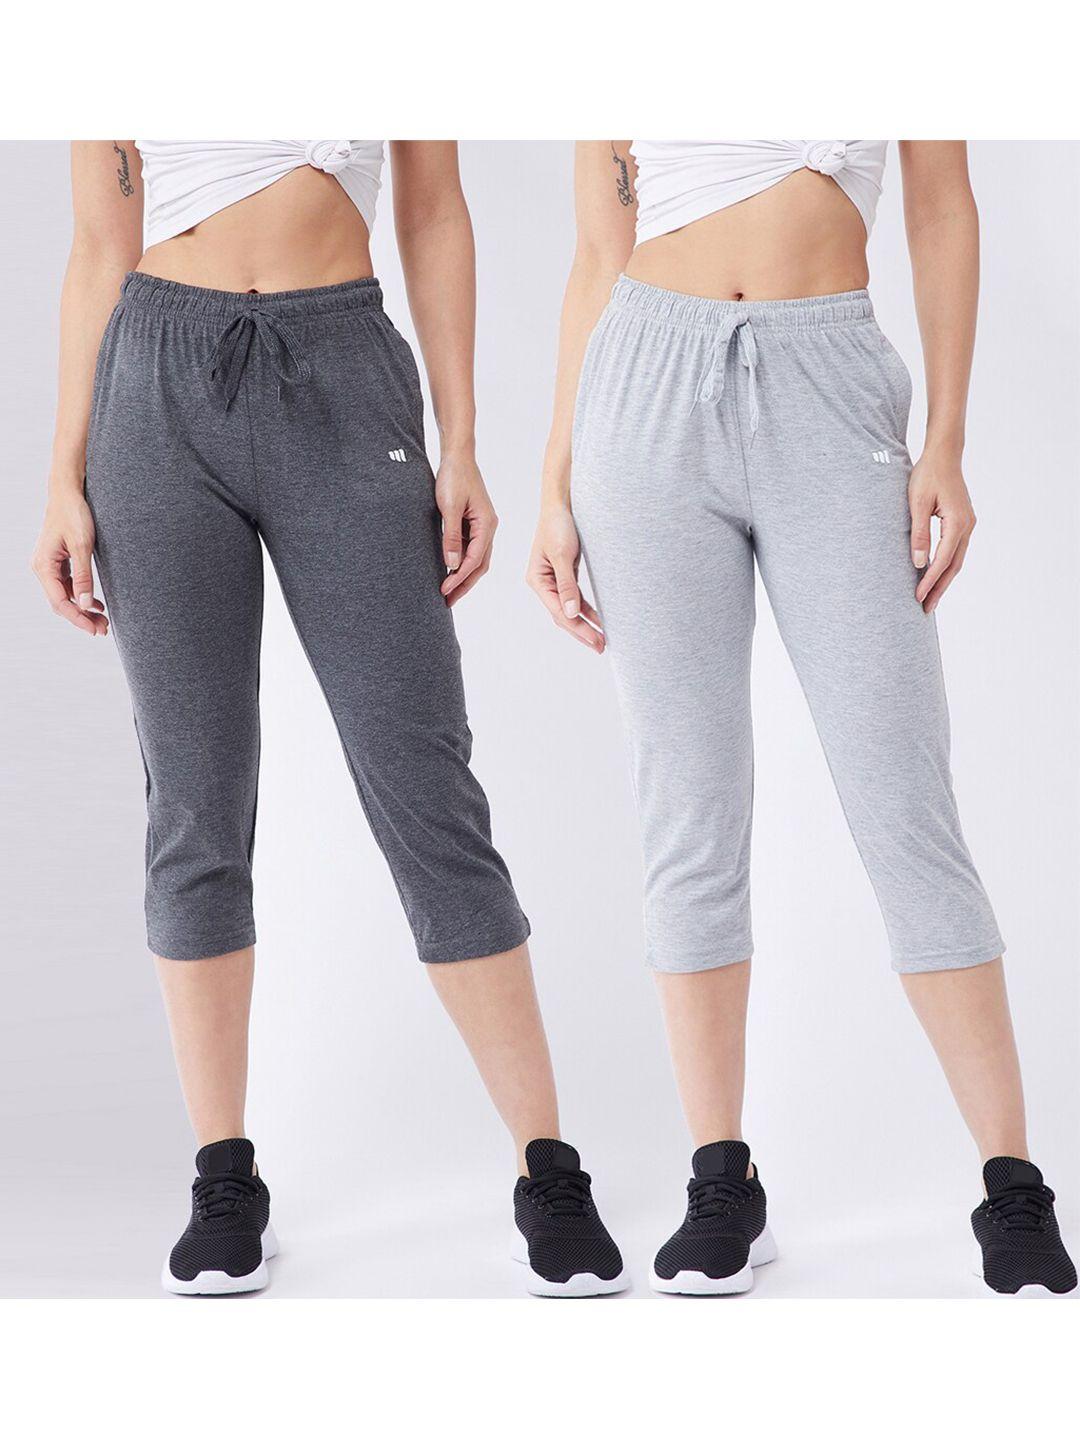 modeve women pack of 2 charcoal & grey capris